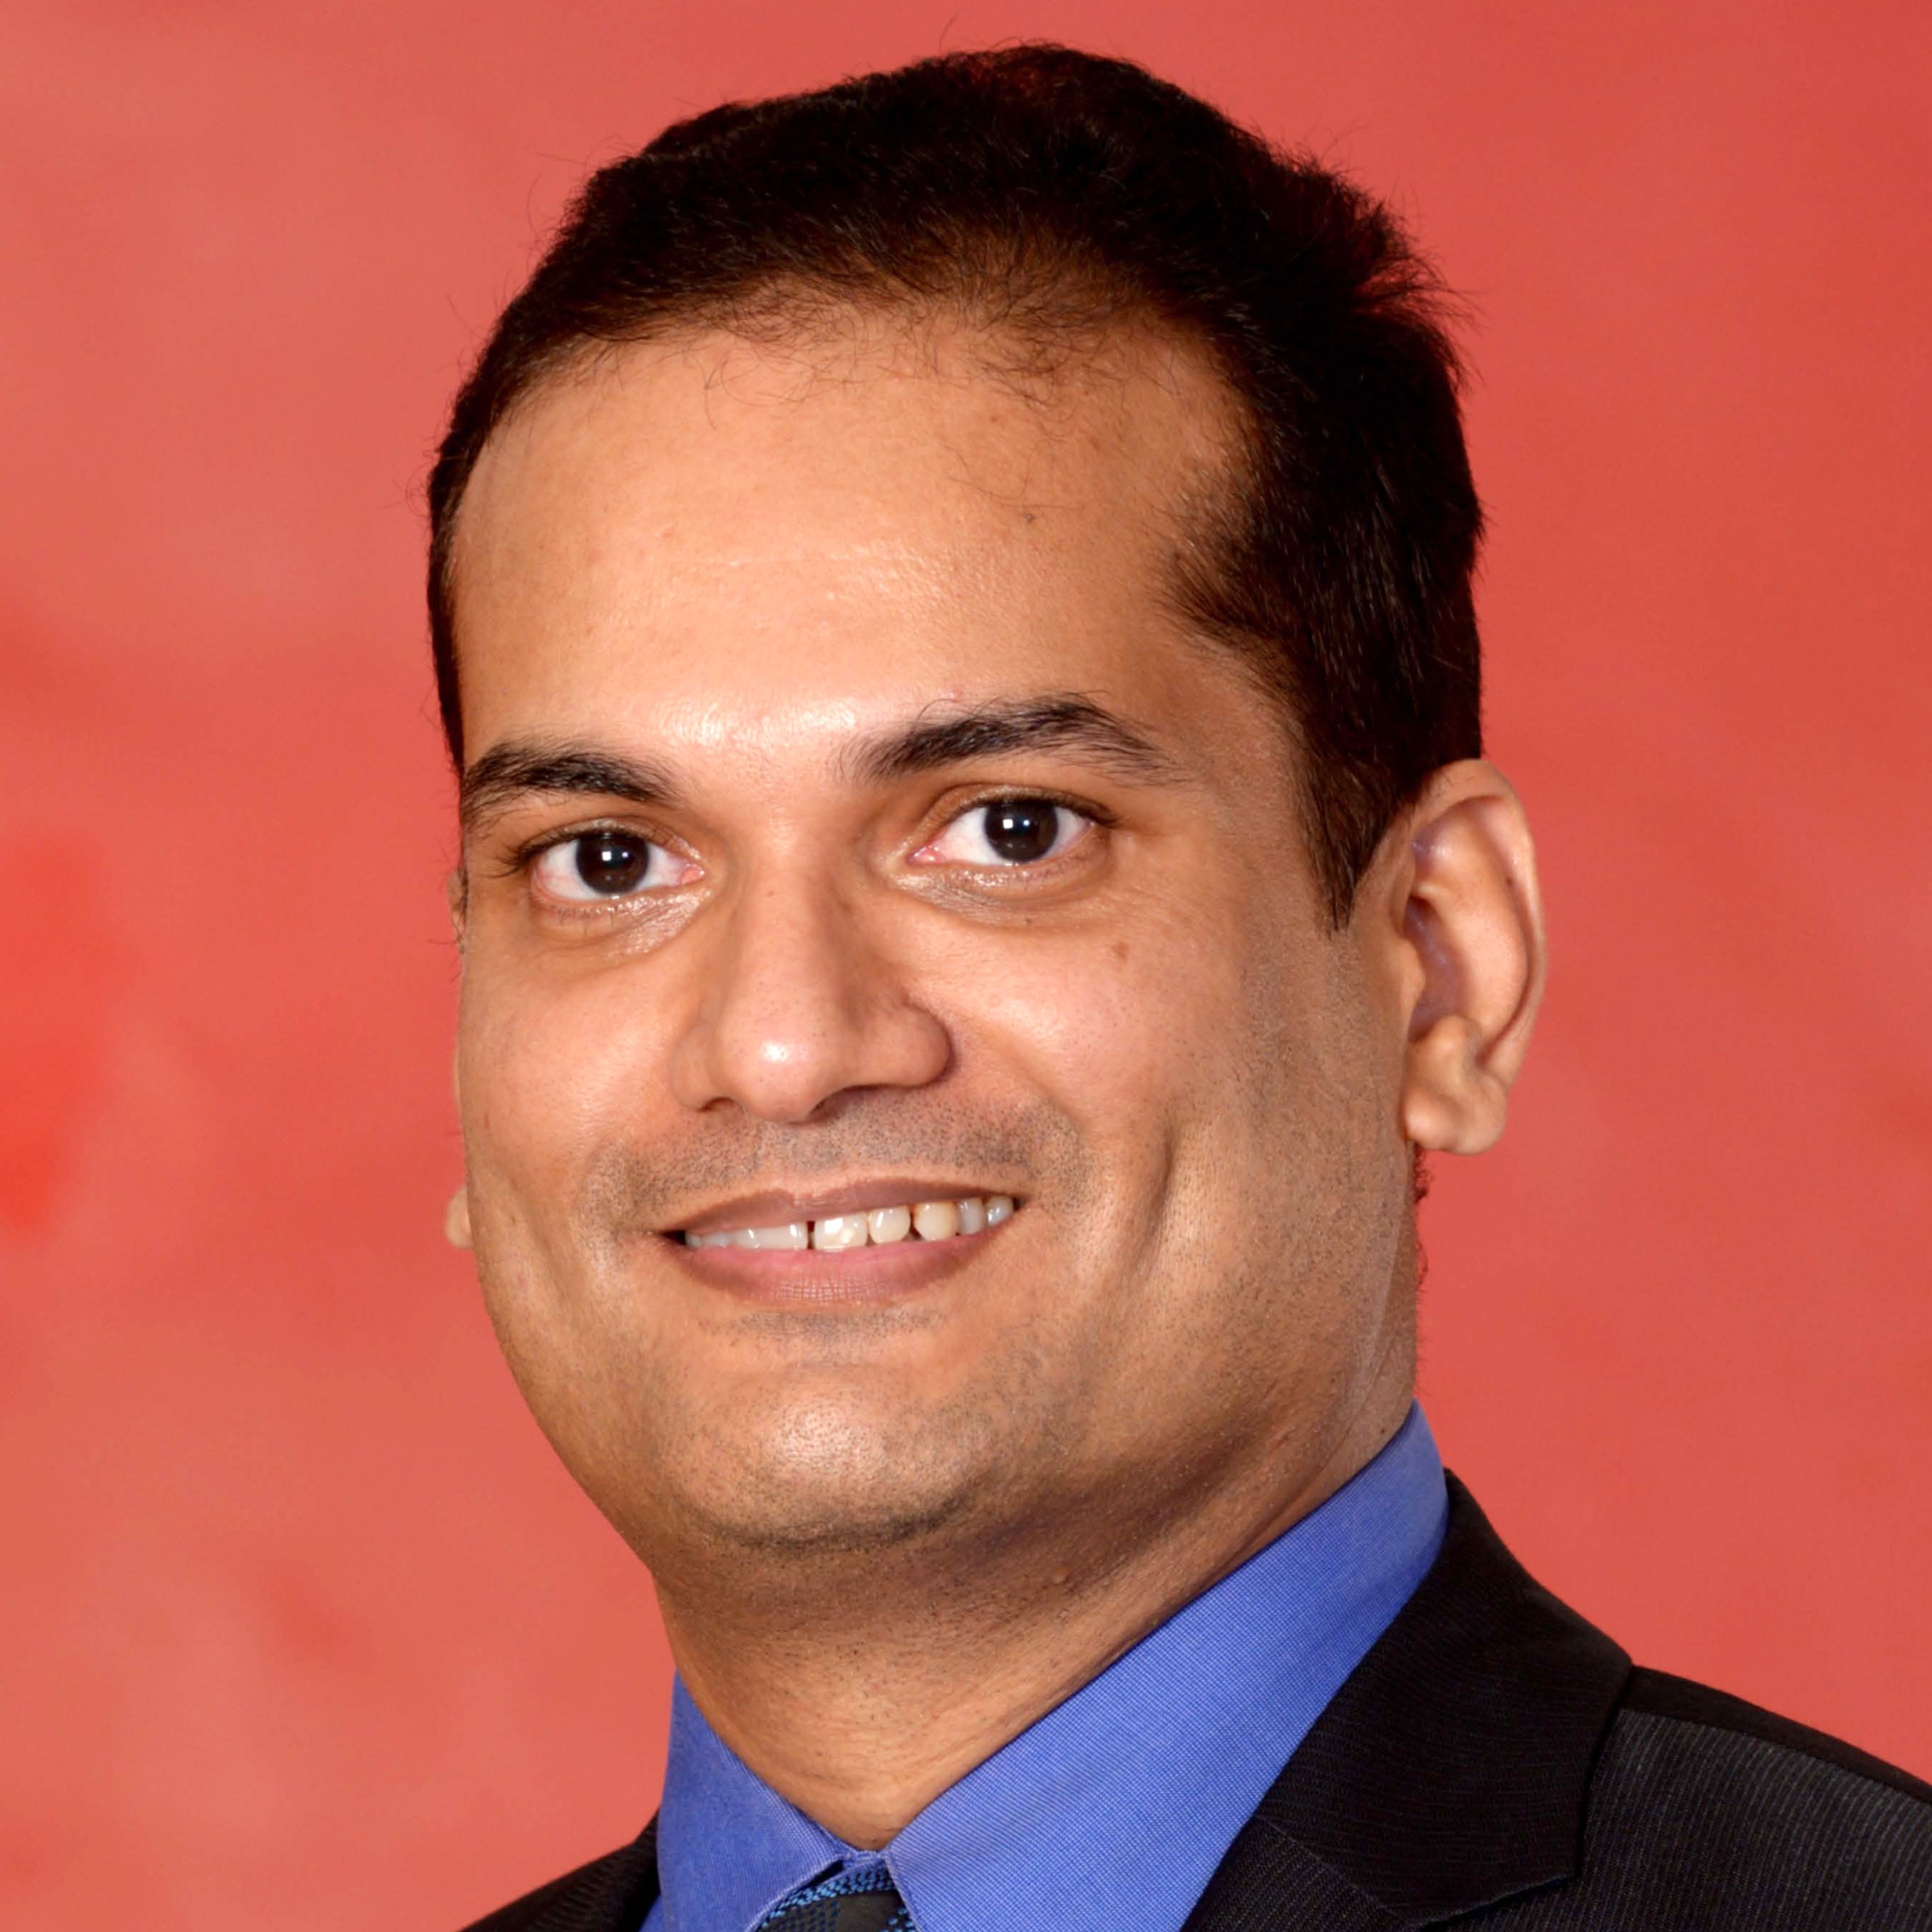 Vinay Pradhan, <span>Country Head - India & South Asia, Udemy Business</span>